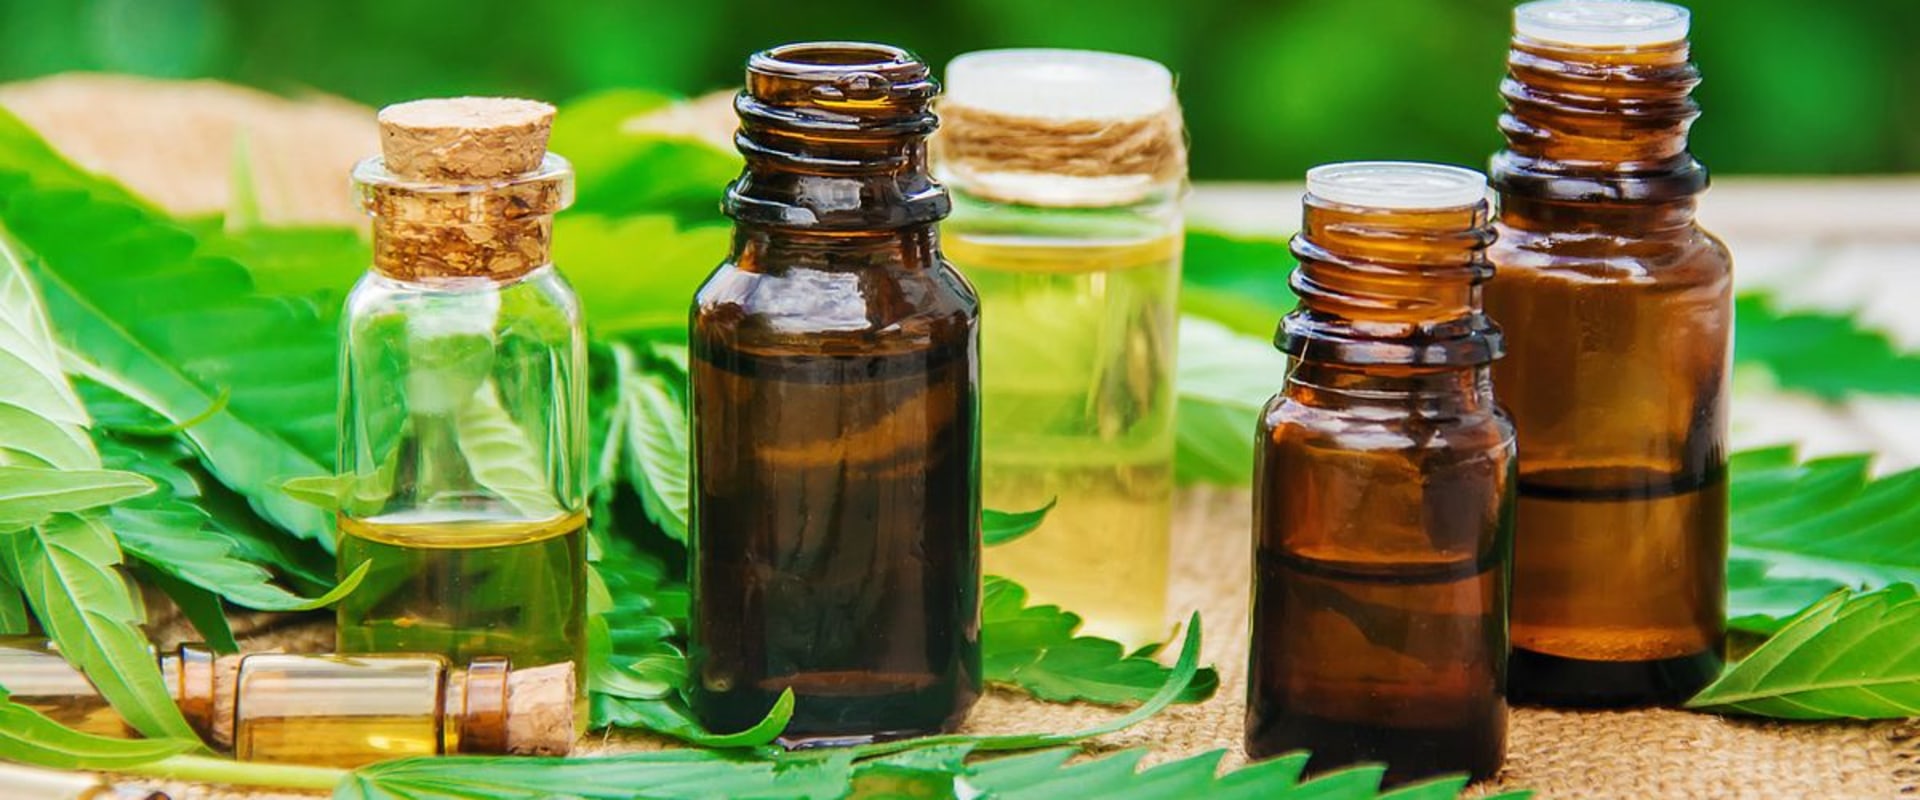 What is better for back pain cbd or thc?